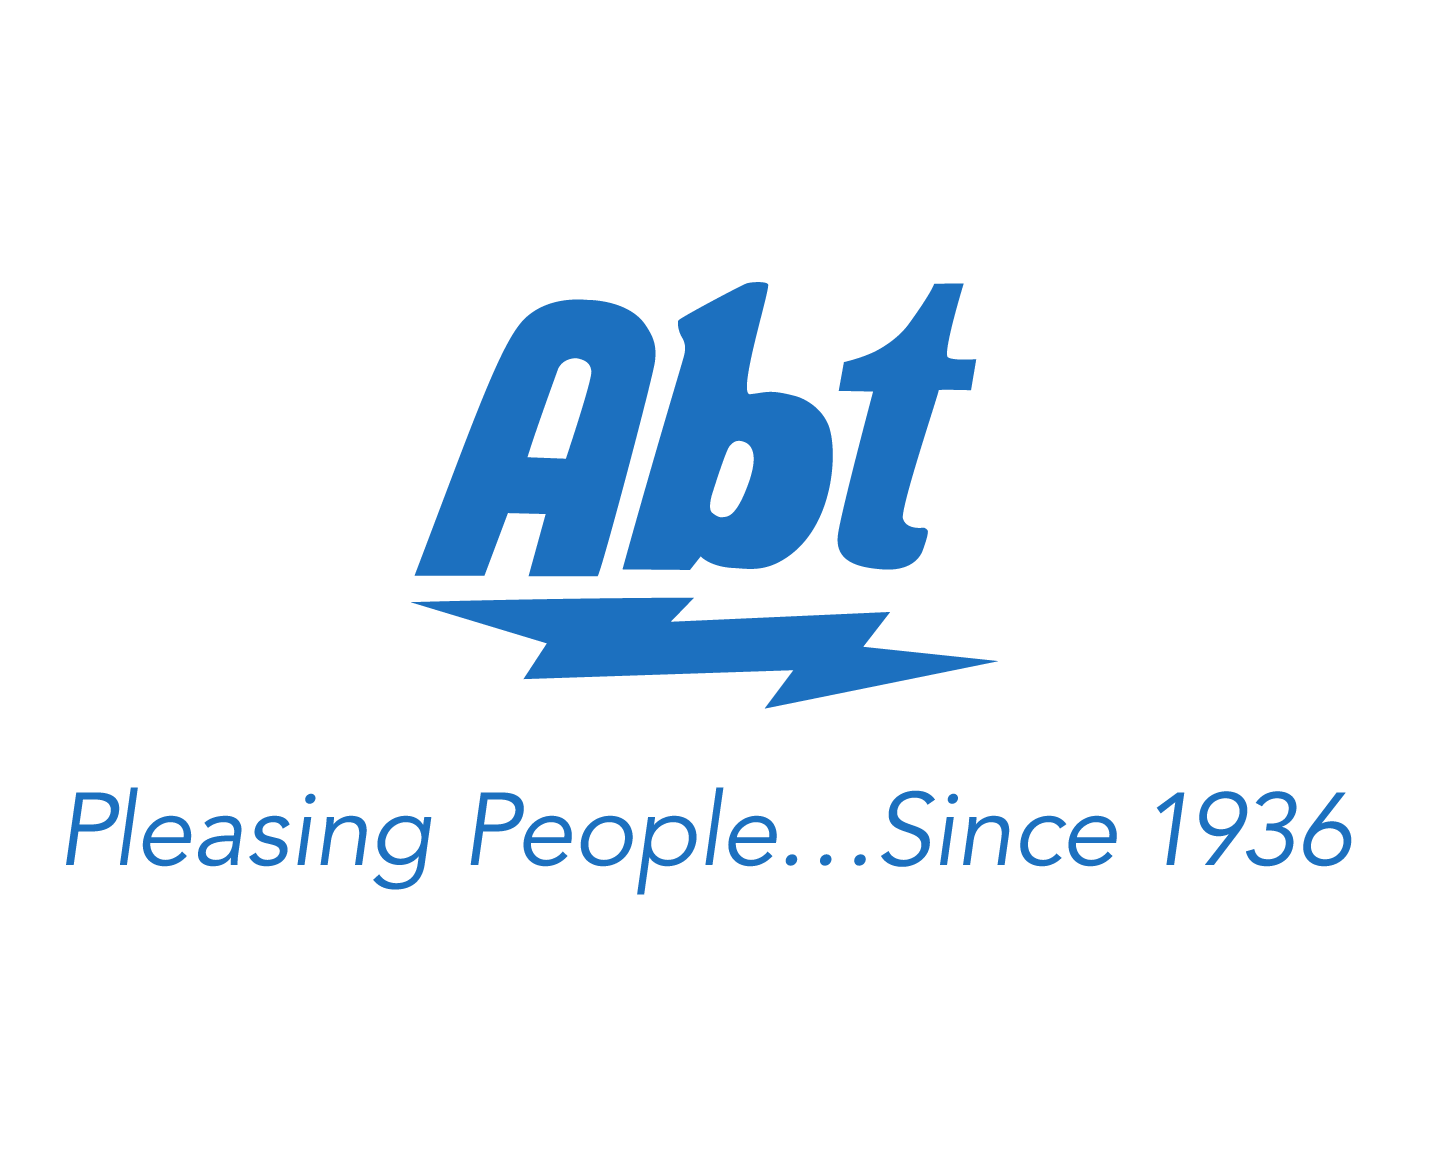 Abt Logo - Abt Logo Usage and Guidelines